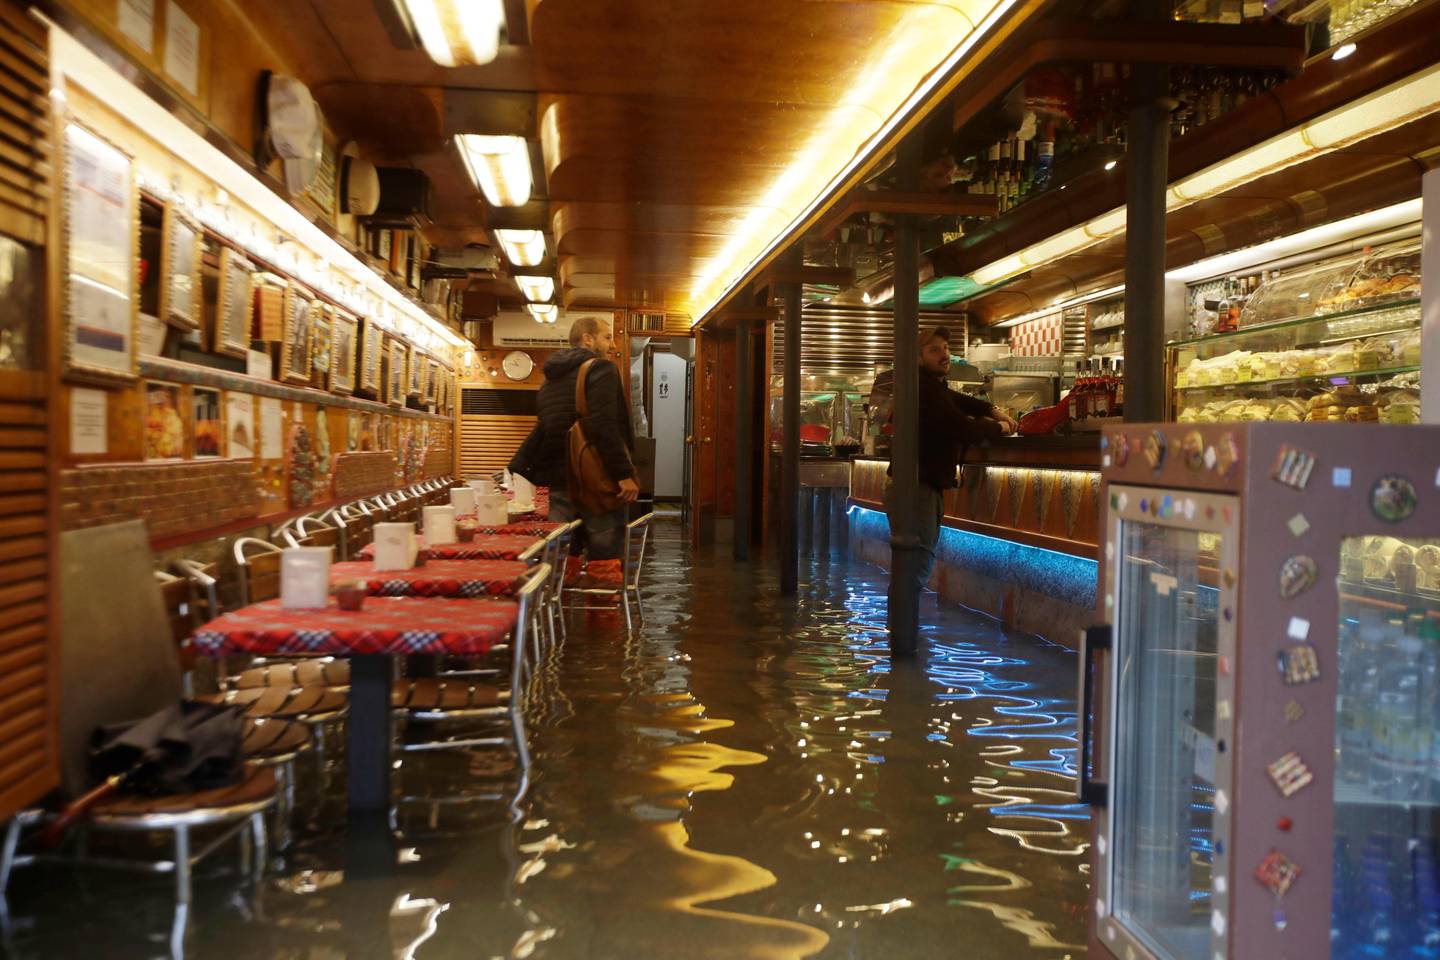 People stand inside a flooded cafe' on the occasion of a high tide, in Venice, Italy, Tuesday, Nov. 12, 2019. The high tide reached a peak of 127cm (4.1ft) at 10:35am while an even higher level of 140cm(4.6ft) was predicted for later Tuesday evening. (AP Photo/Luca Bruno)